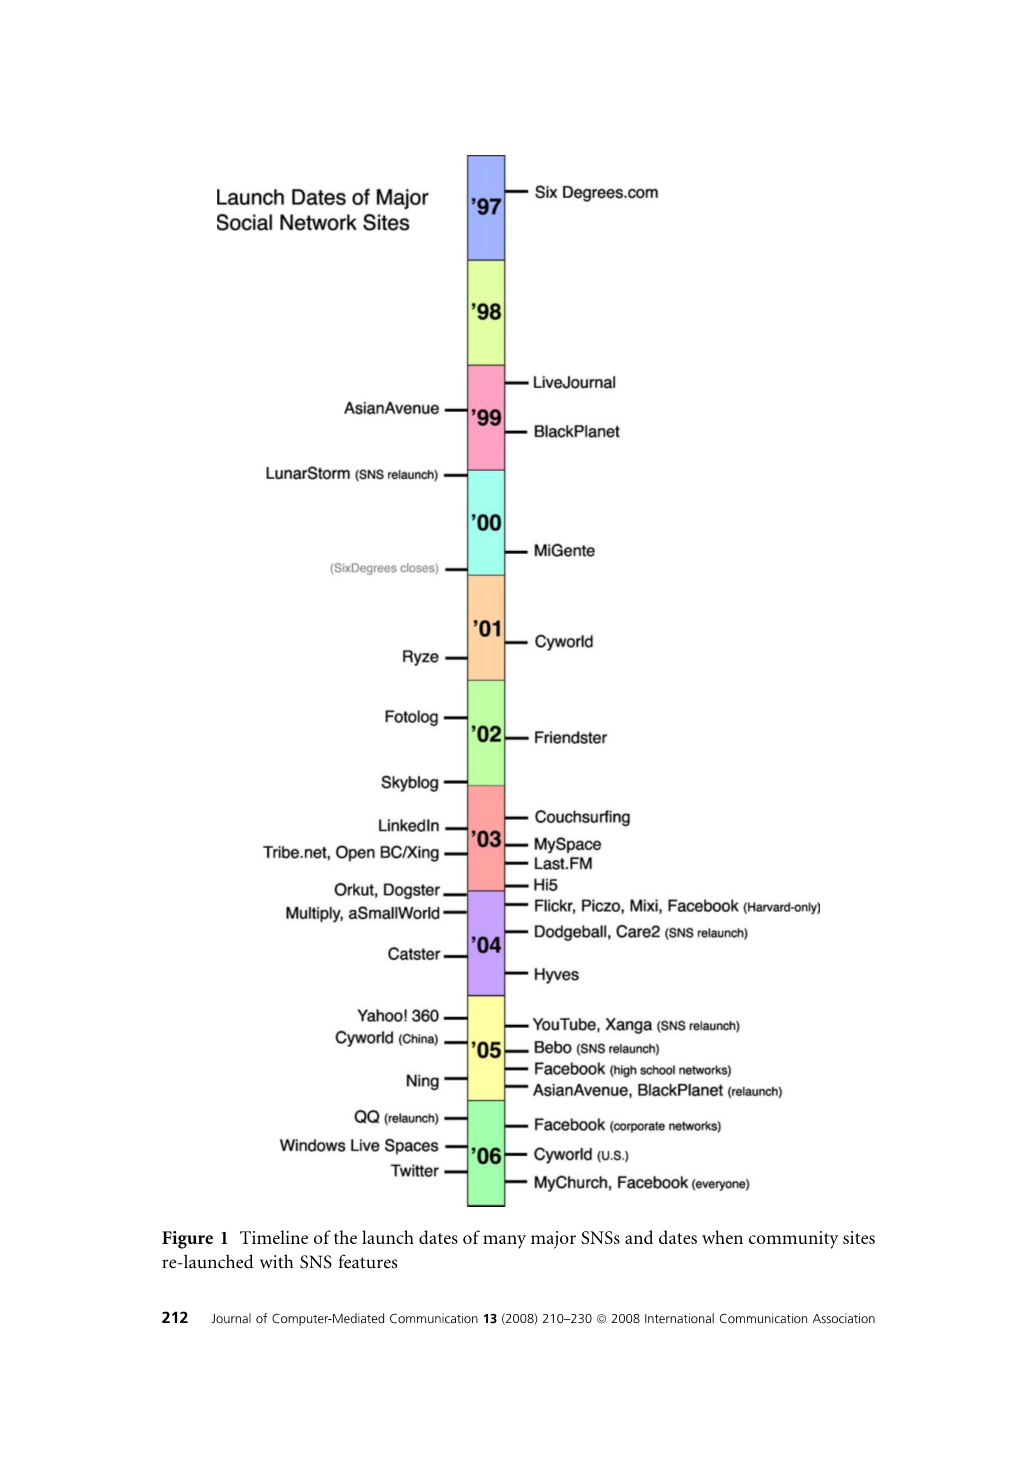 Figure 1 Timeline of the Launch Dates of Many Major Snss and Dates When Community Sites Re-Launched with SNS Features